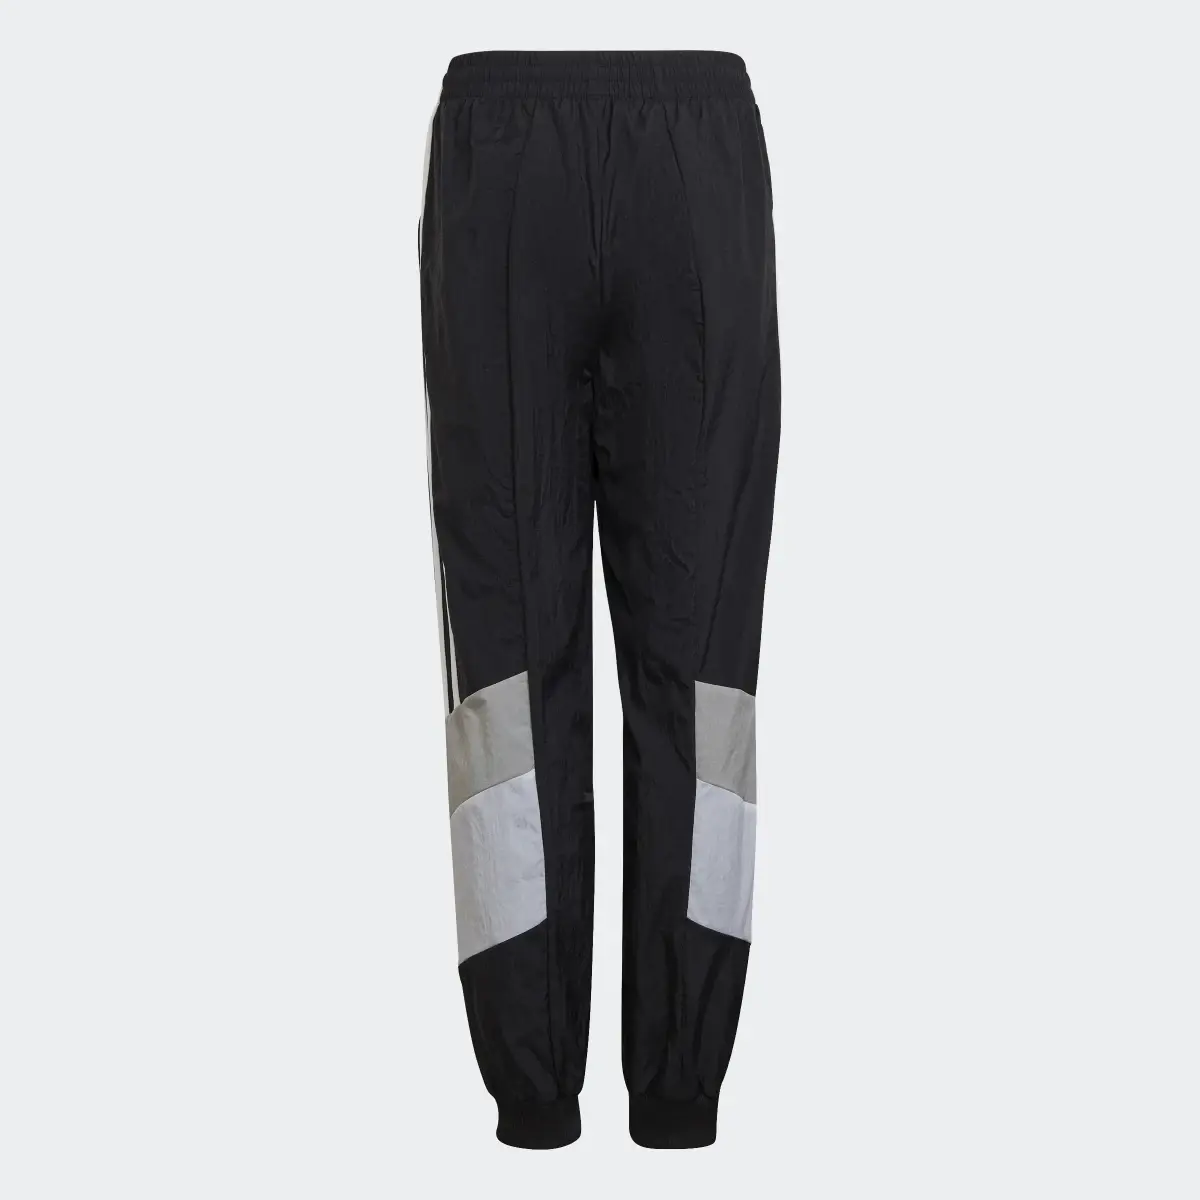 Adidas Colorblock Woven Tracksuit Bottoms. 2